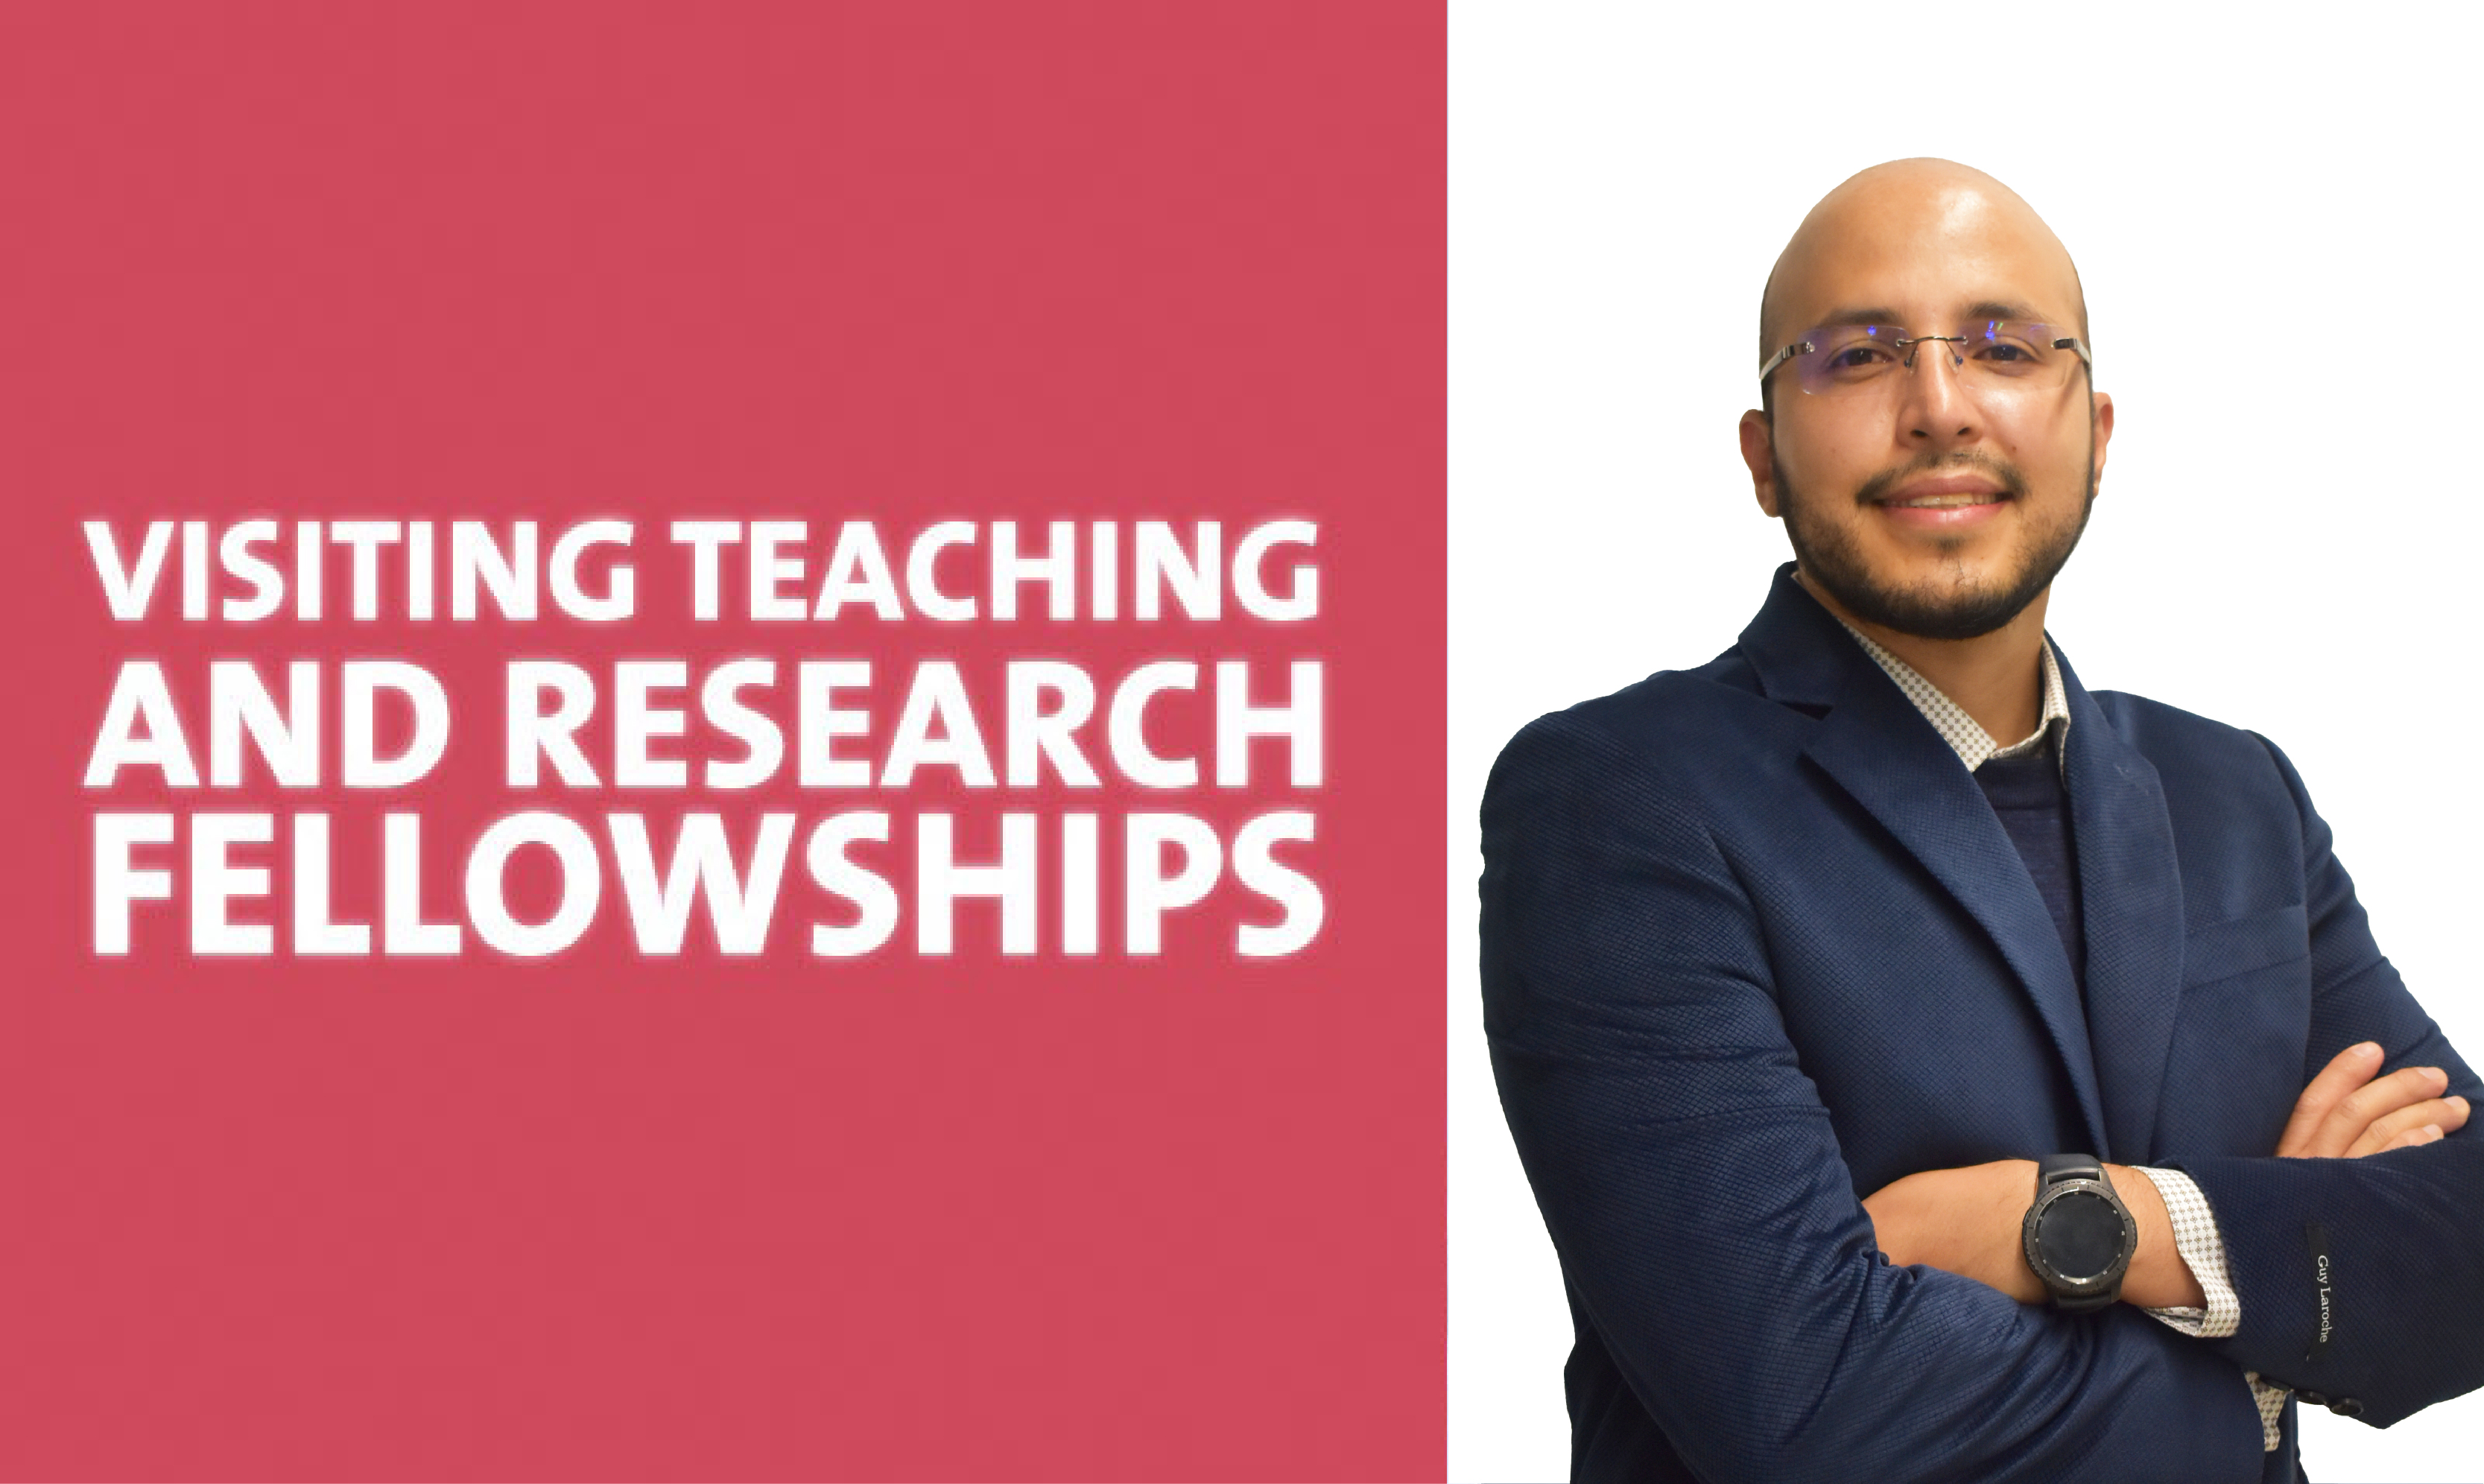 Visiting Teaching and Research Fellowships